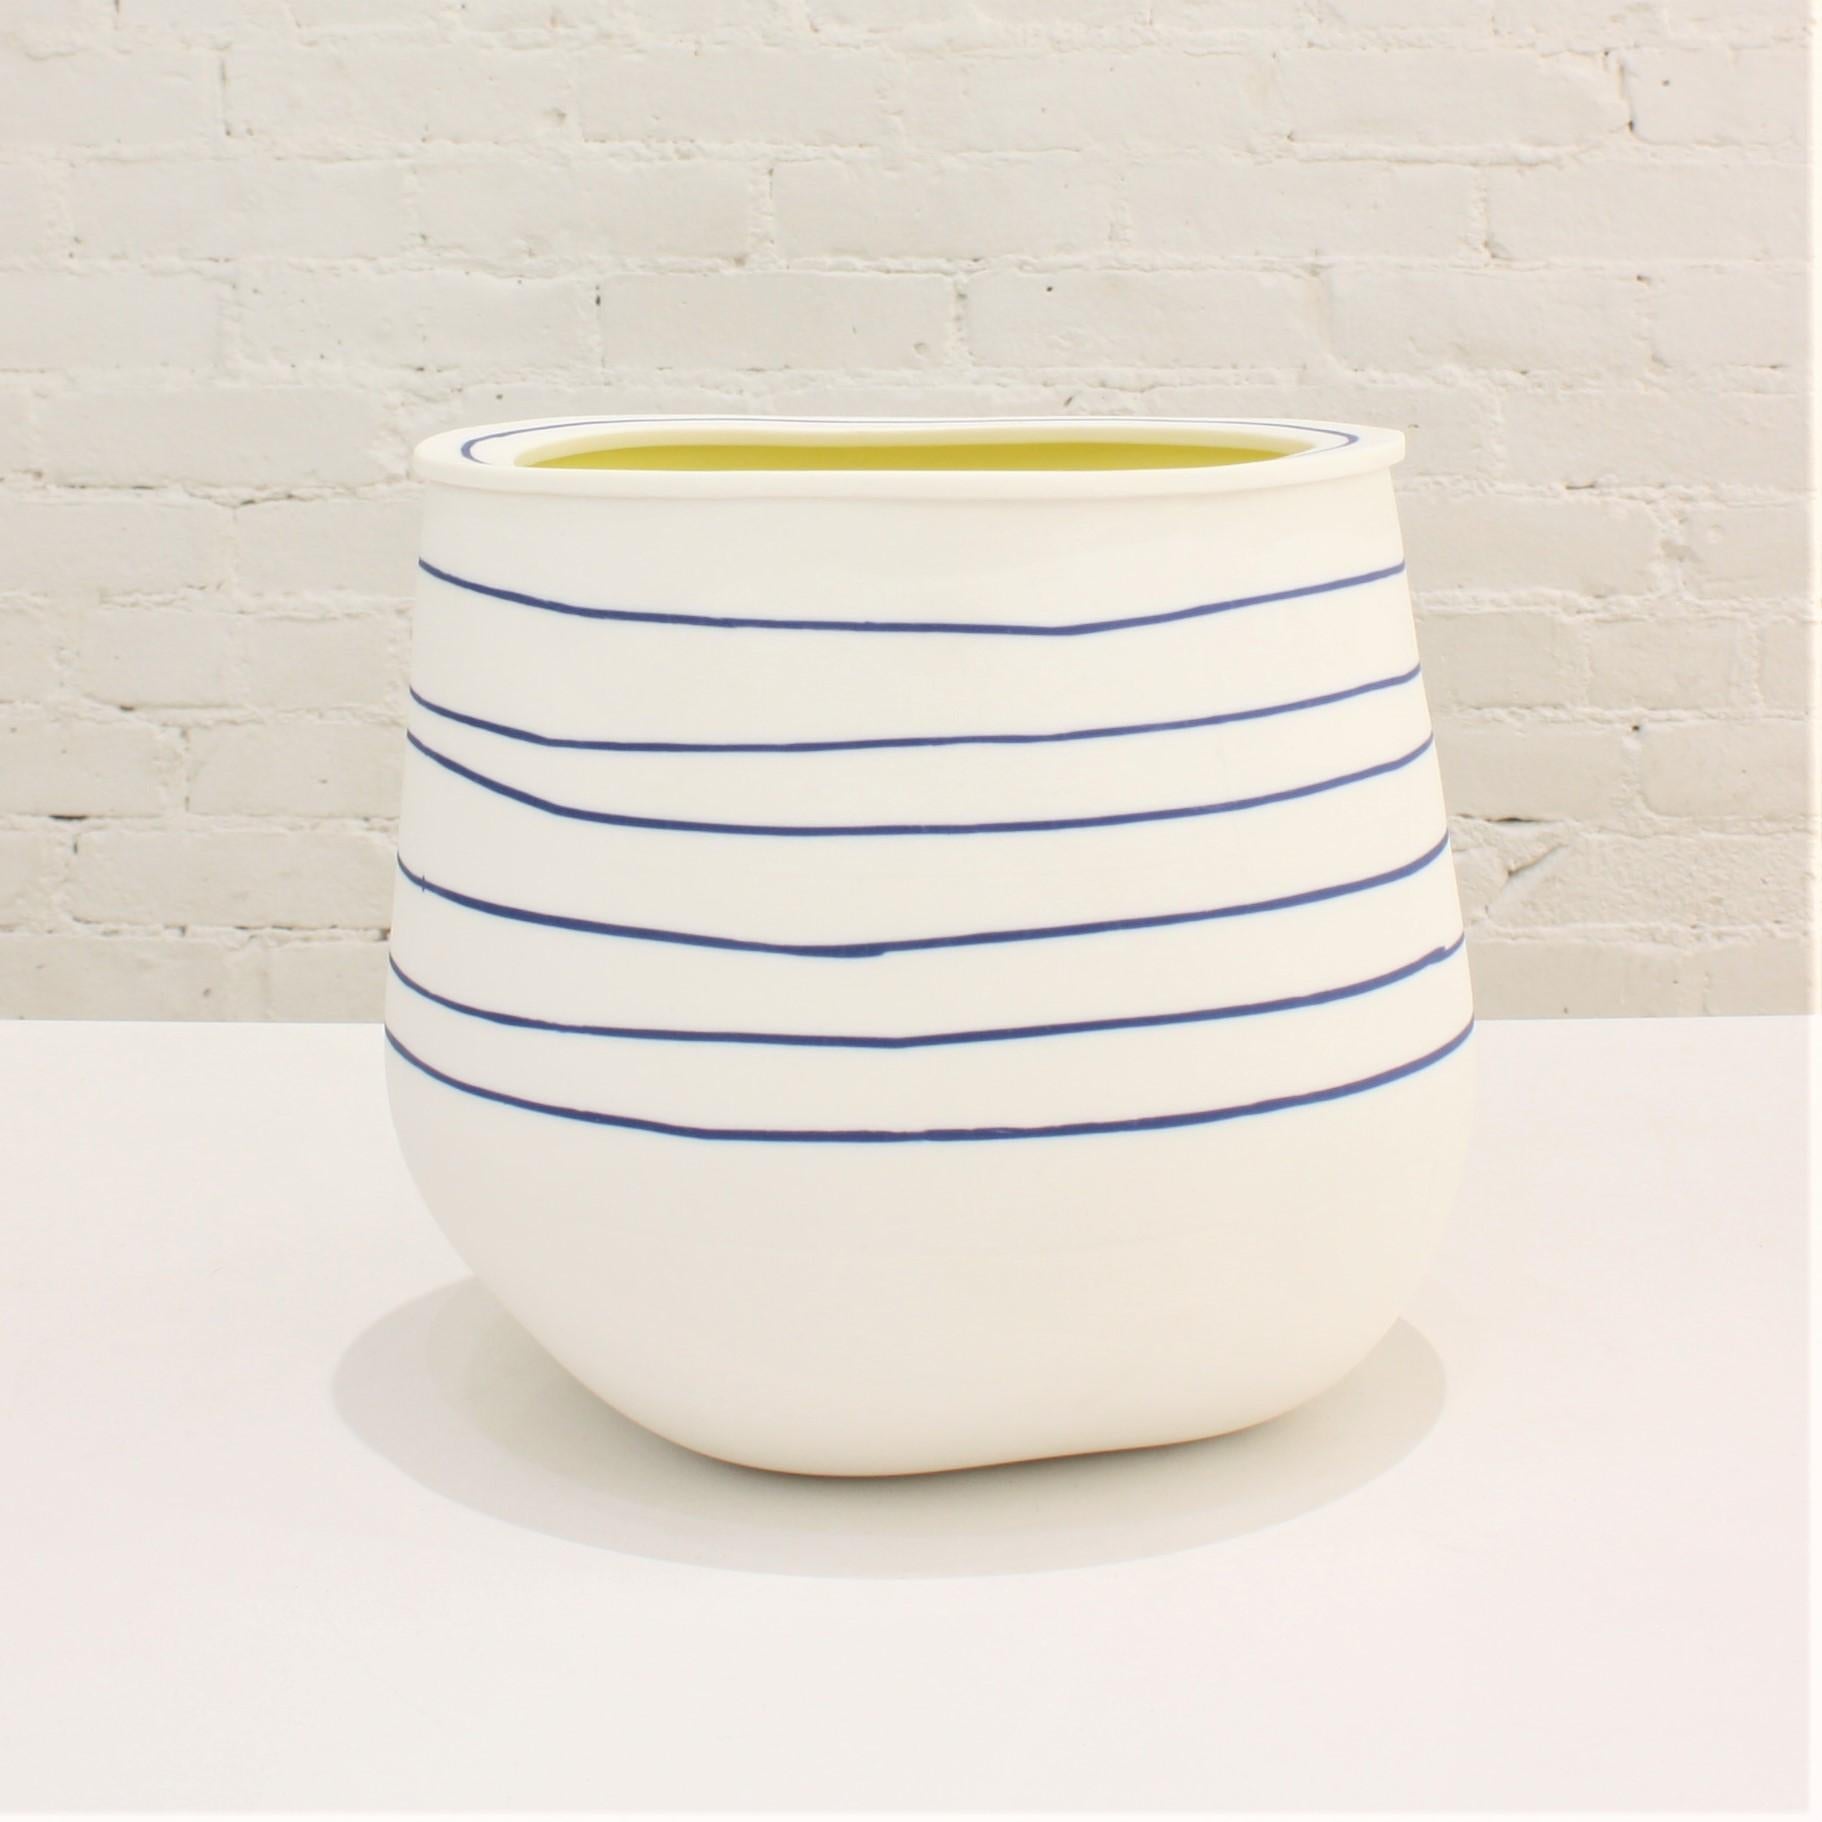 One-of-a-kind slab-built porcelain vase with blue stripes with vivid yellow interior. Well-known ceramicist Eric Hibelot decorates his porcelain vessels with bold primary colors, in the pop art tradition.

Hand-painted. Signed by the